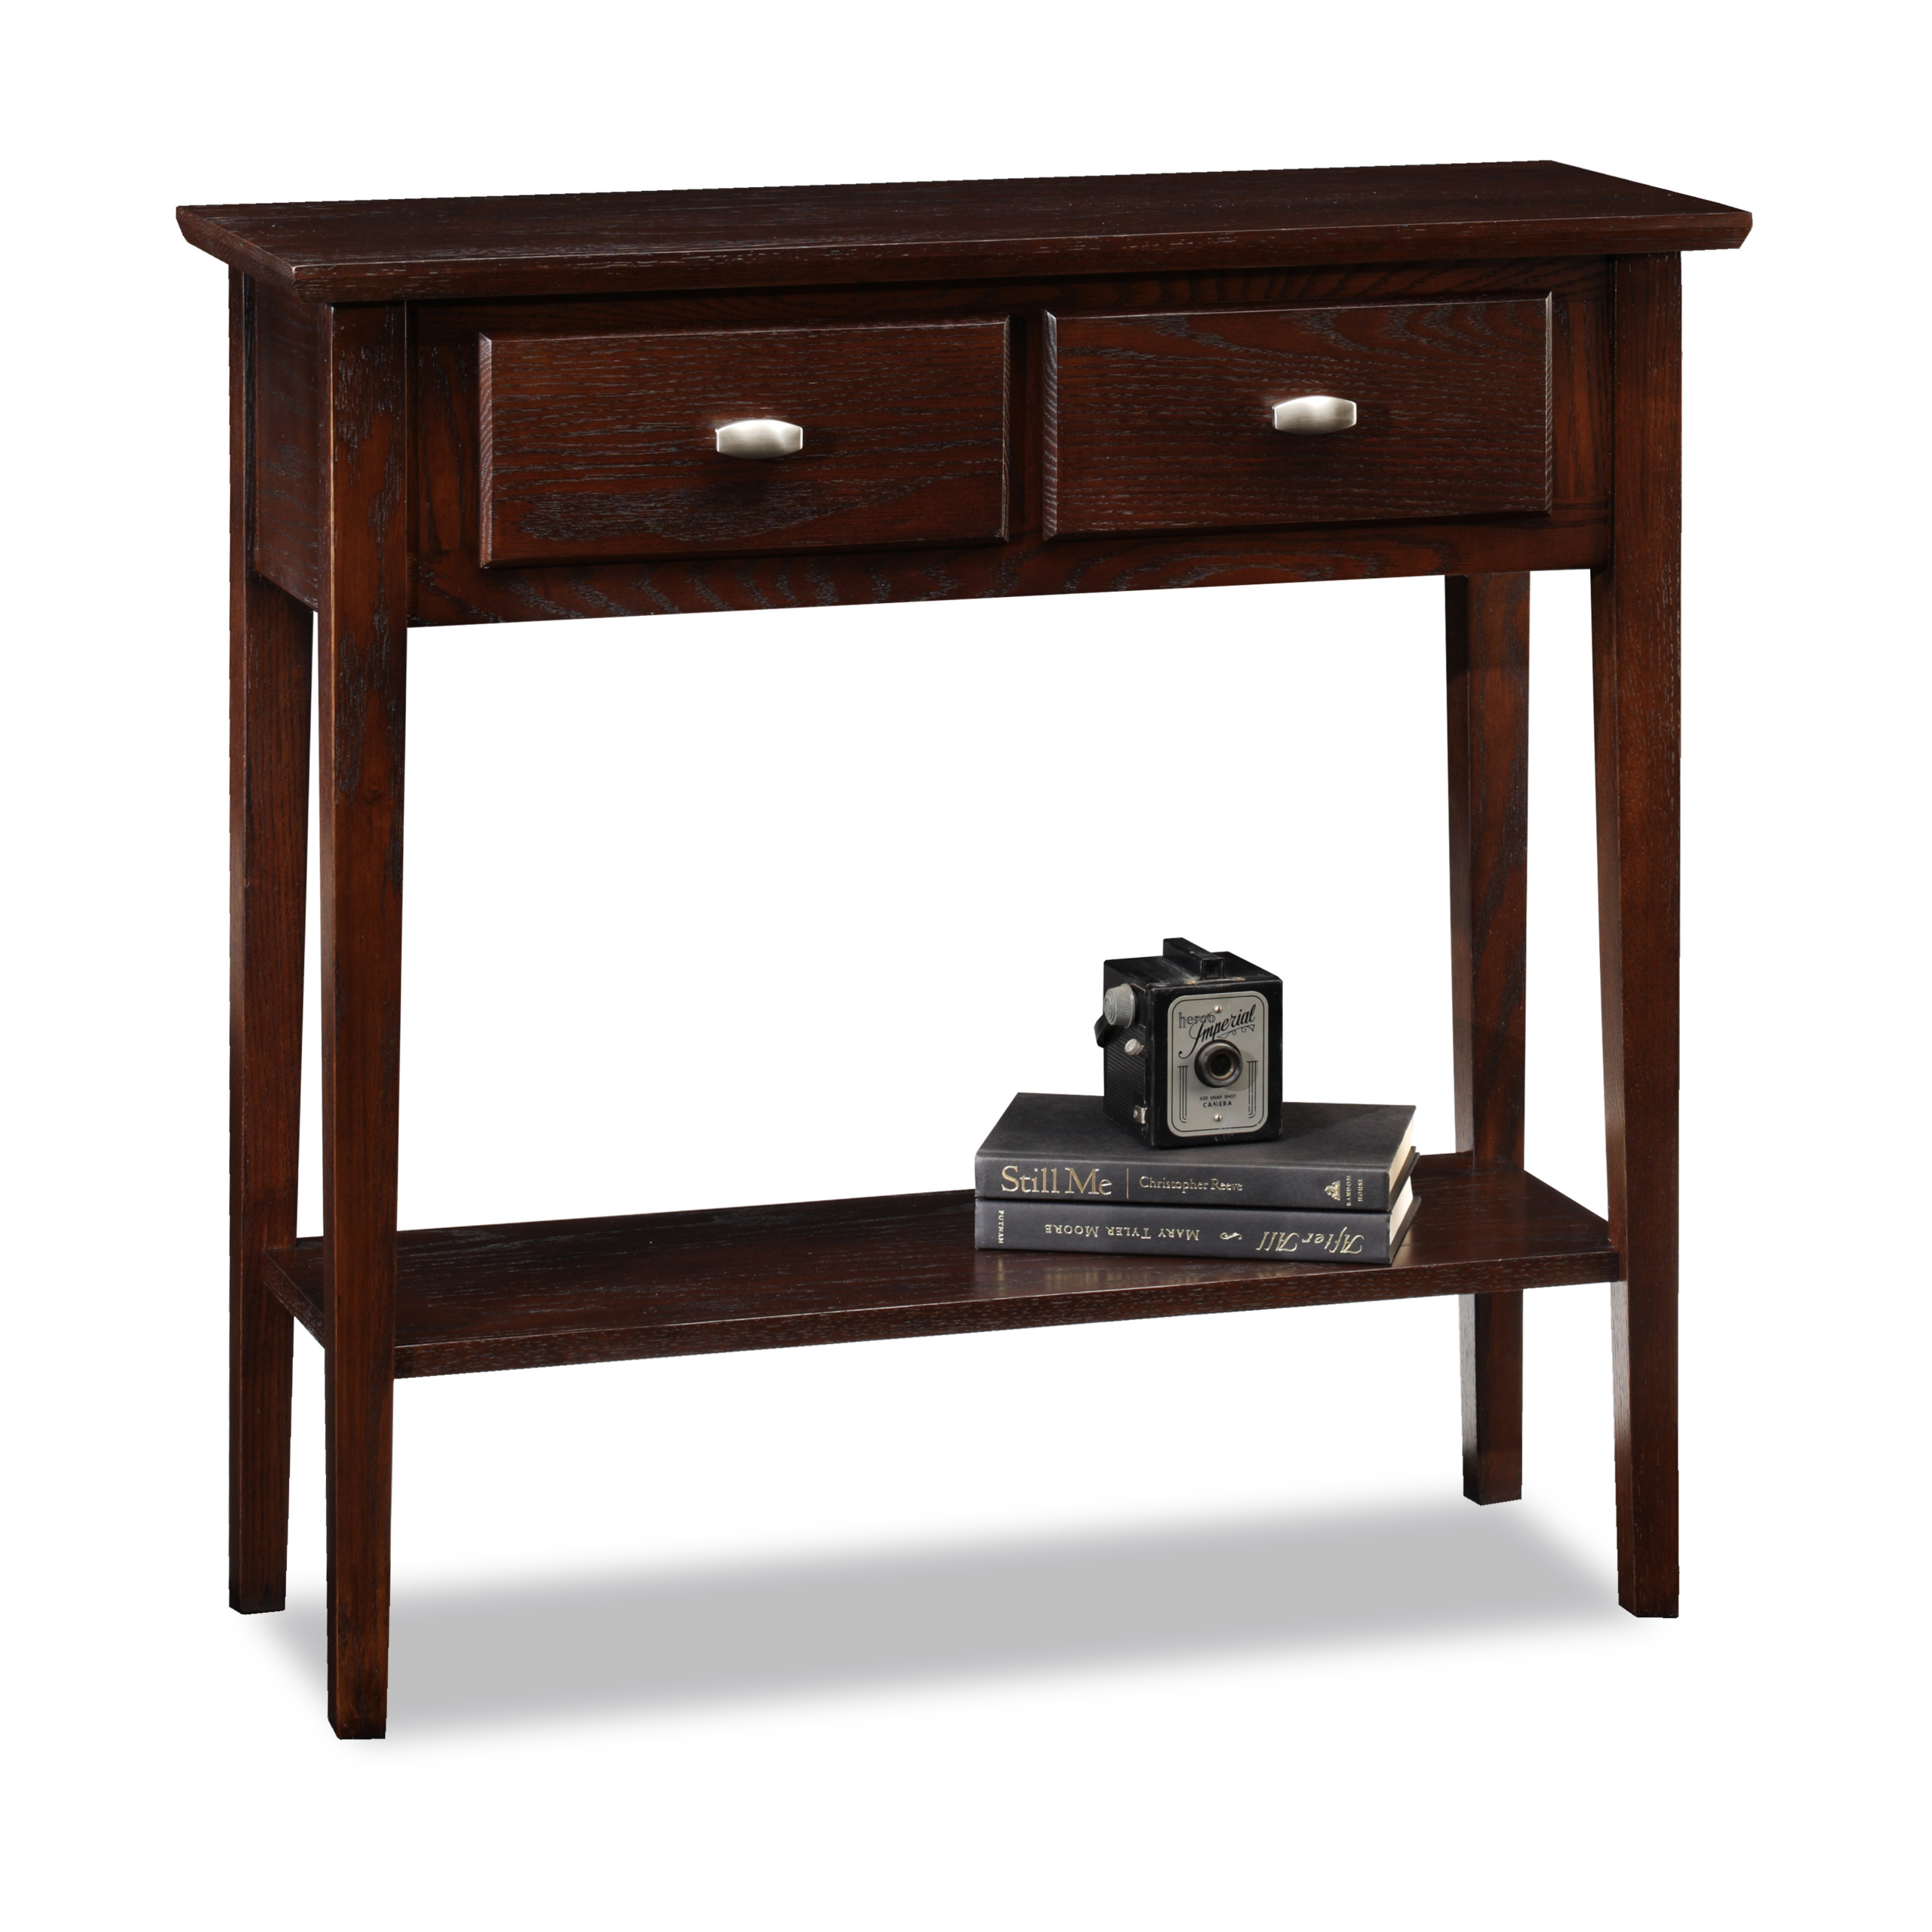 Favorite finds hall console sofa table